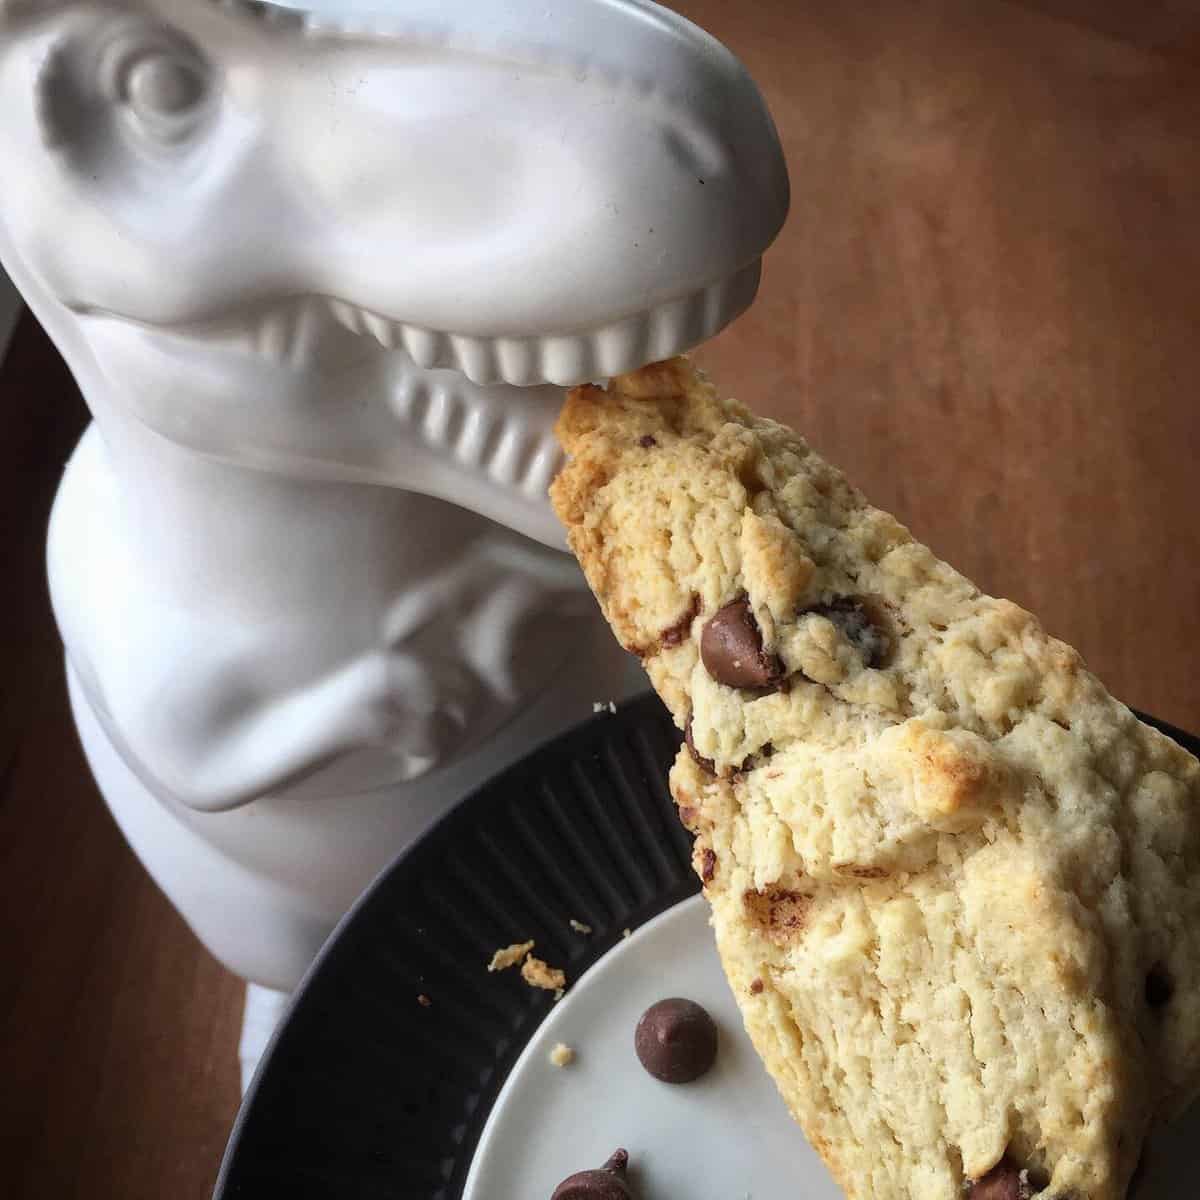 Tyranosaurus rex cookie jar taking a bite out of a chocolate chip scone.